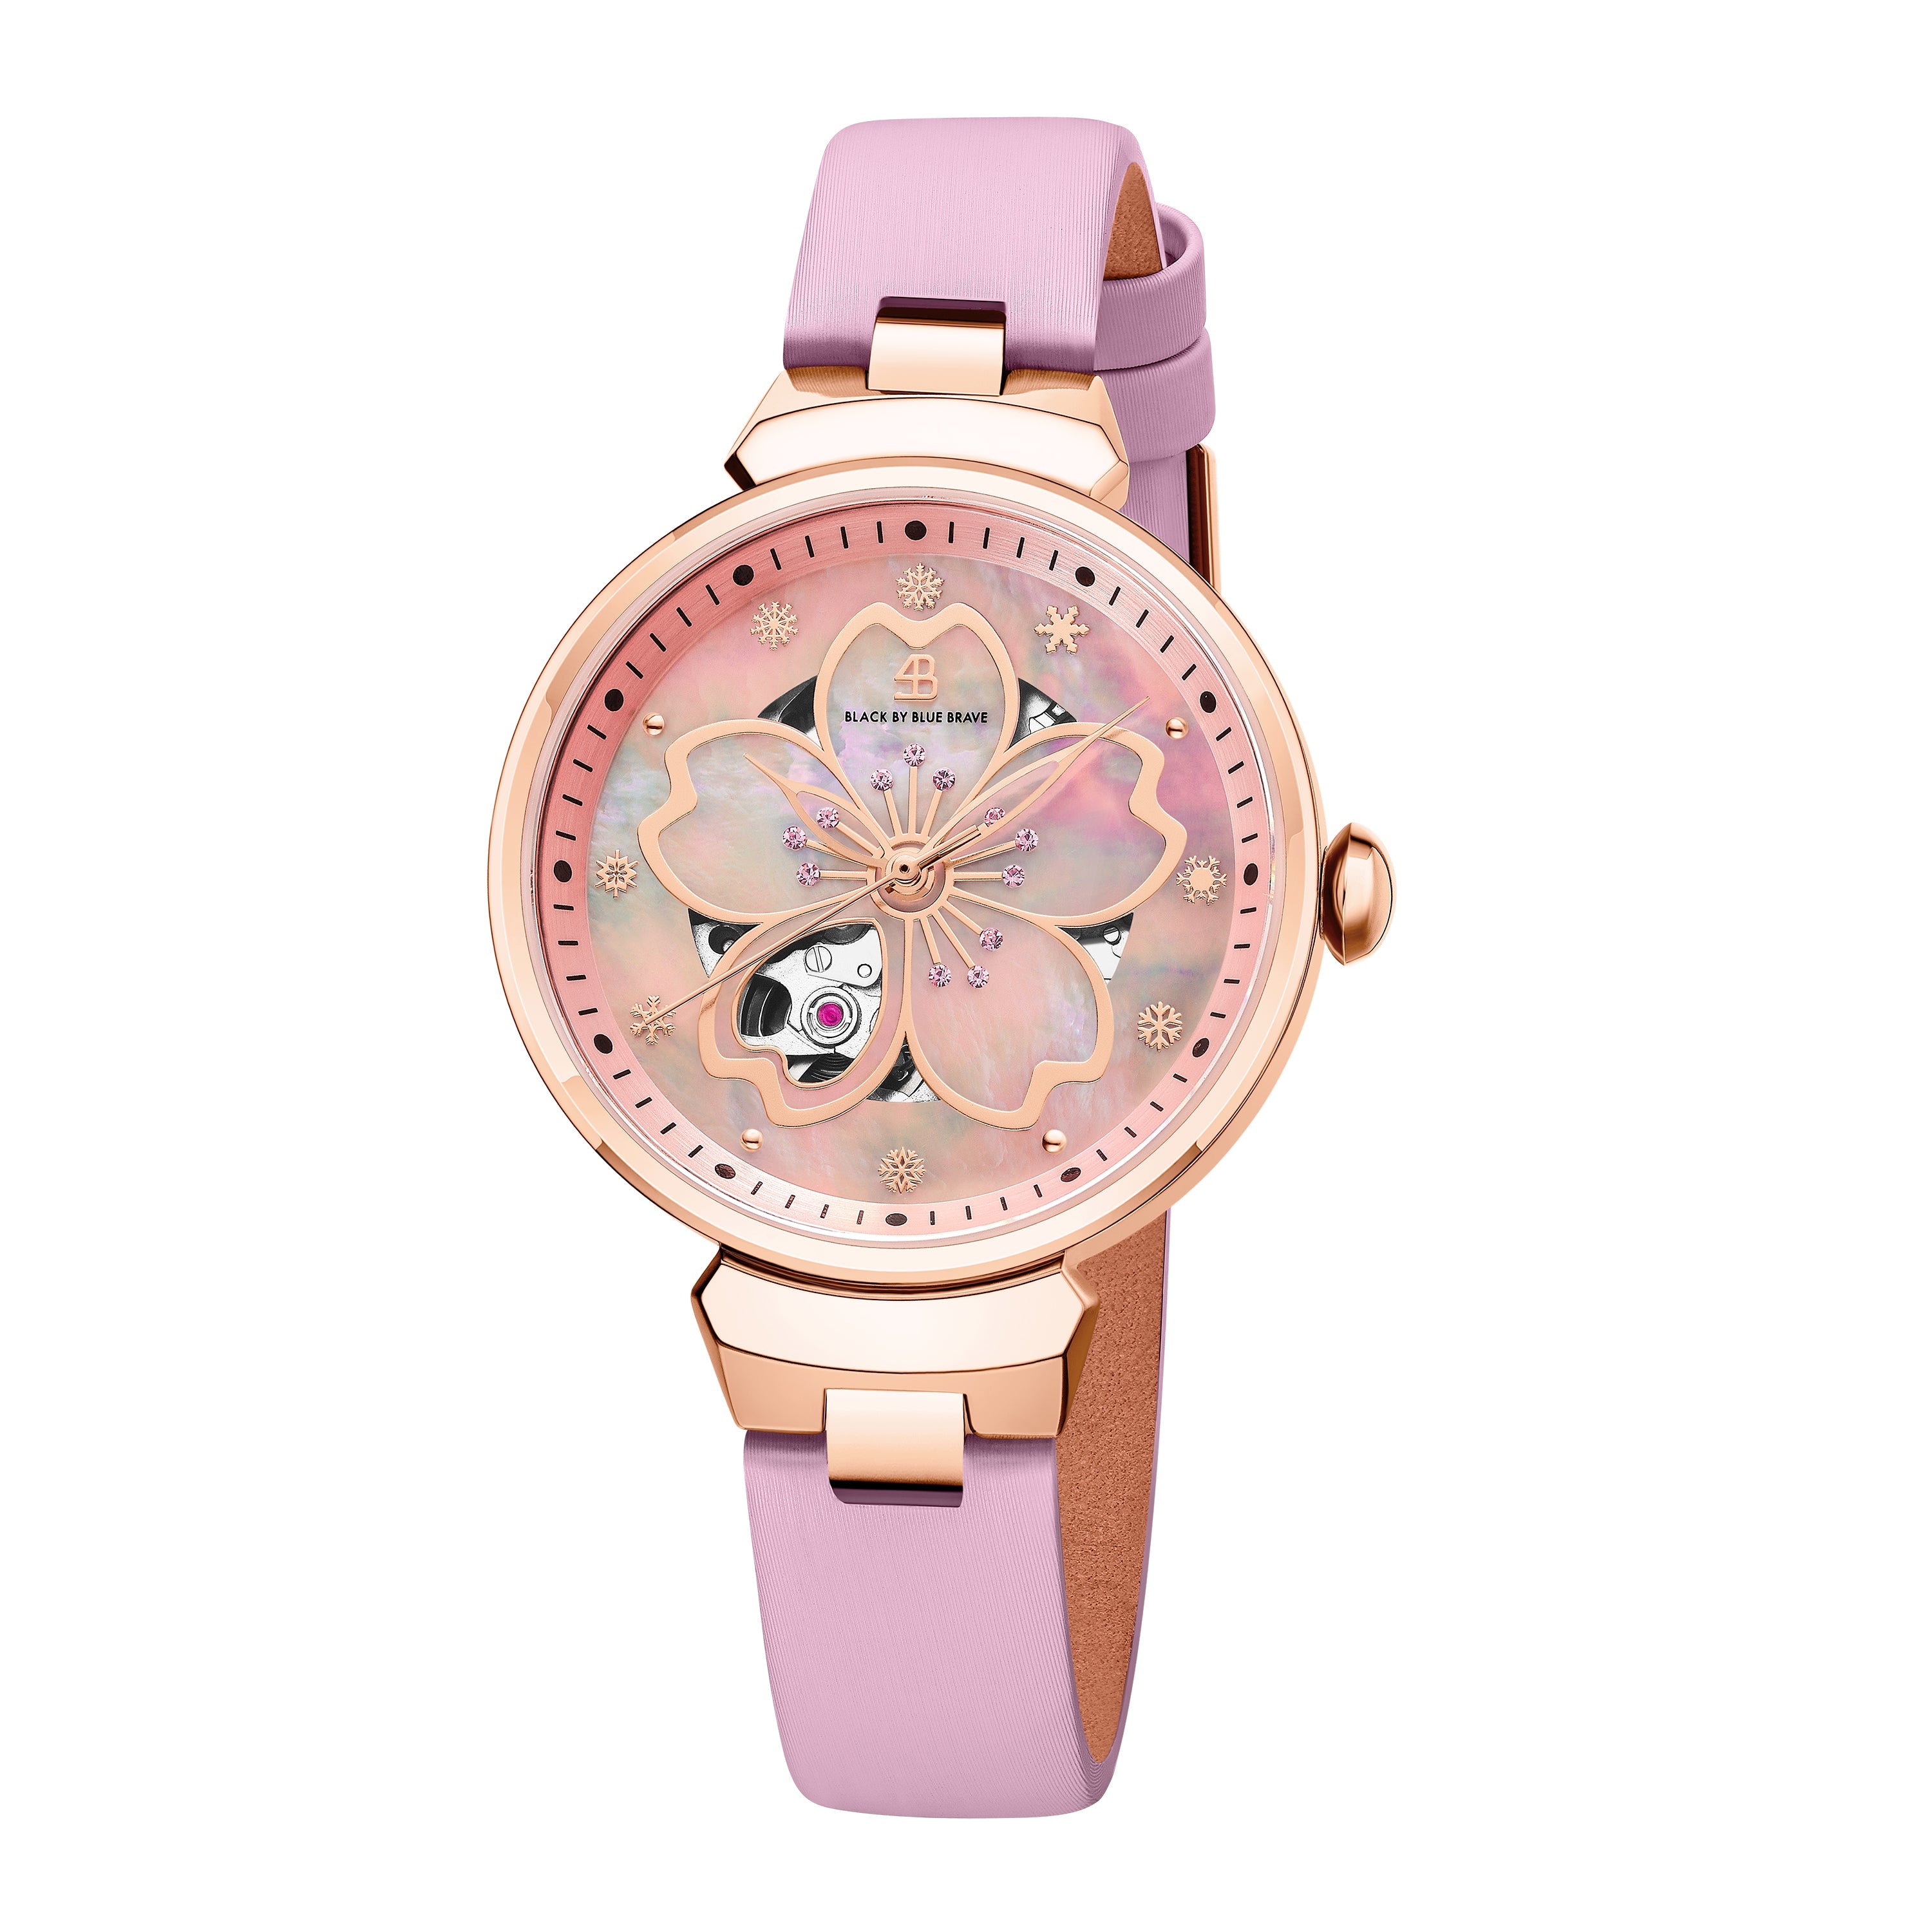 Pink Cherry Blossom 36mm Automatic Watch & Rosegold Flower Earrings & Pink Ceramic Ceramic